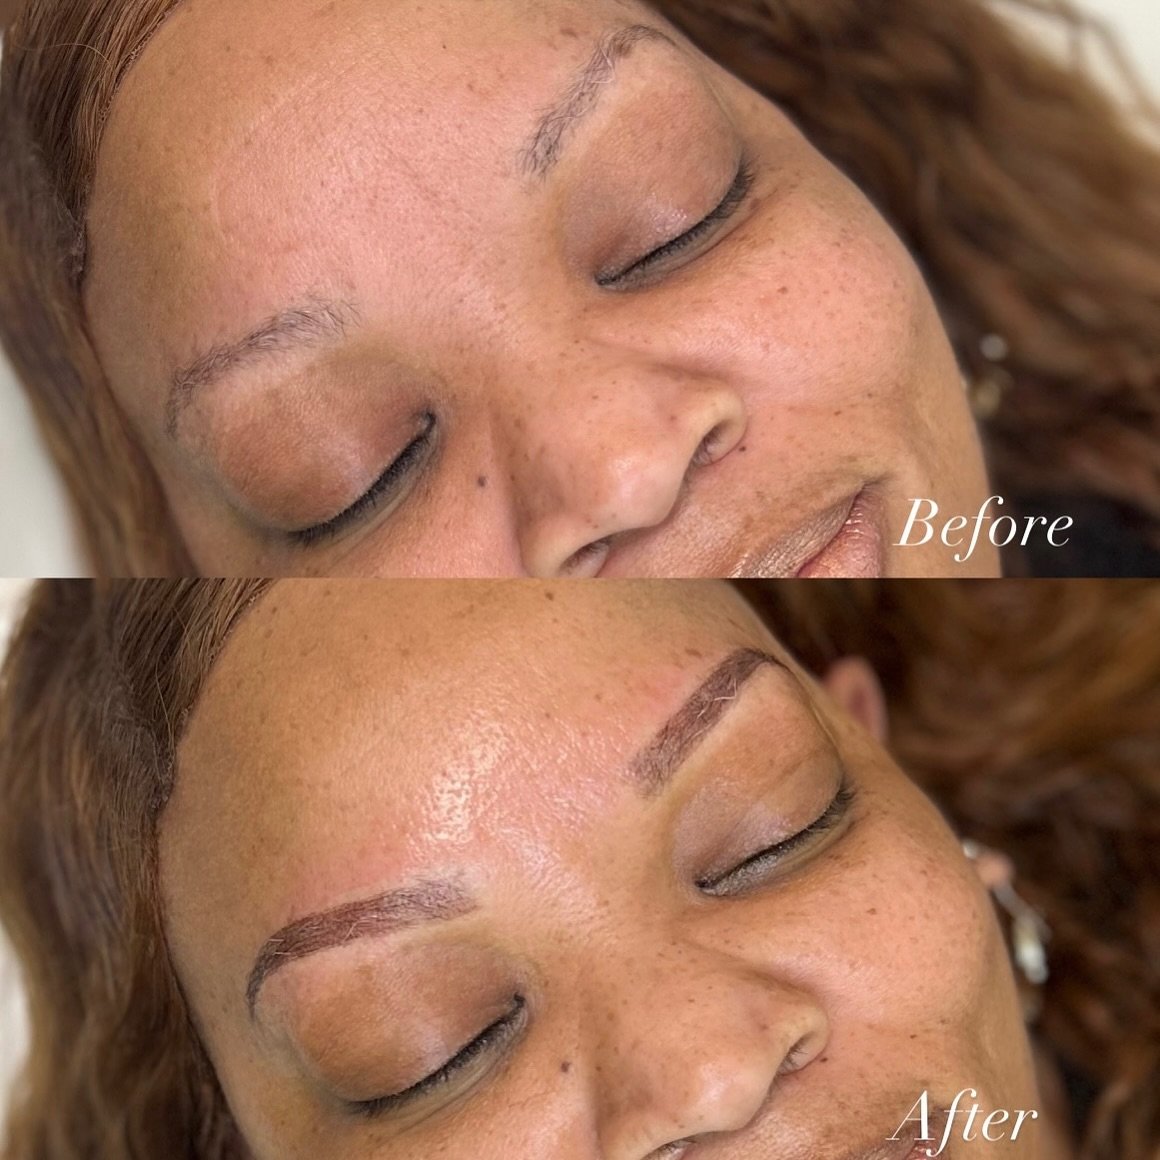 No more waking up early to draw on her brows ✨

Service: Ombr&eacute; Powder Brows